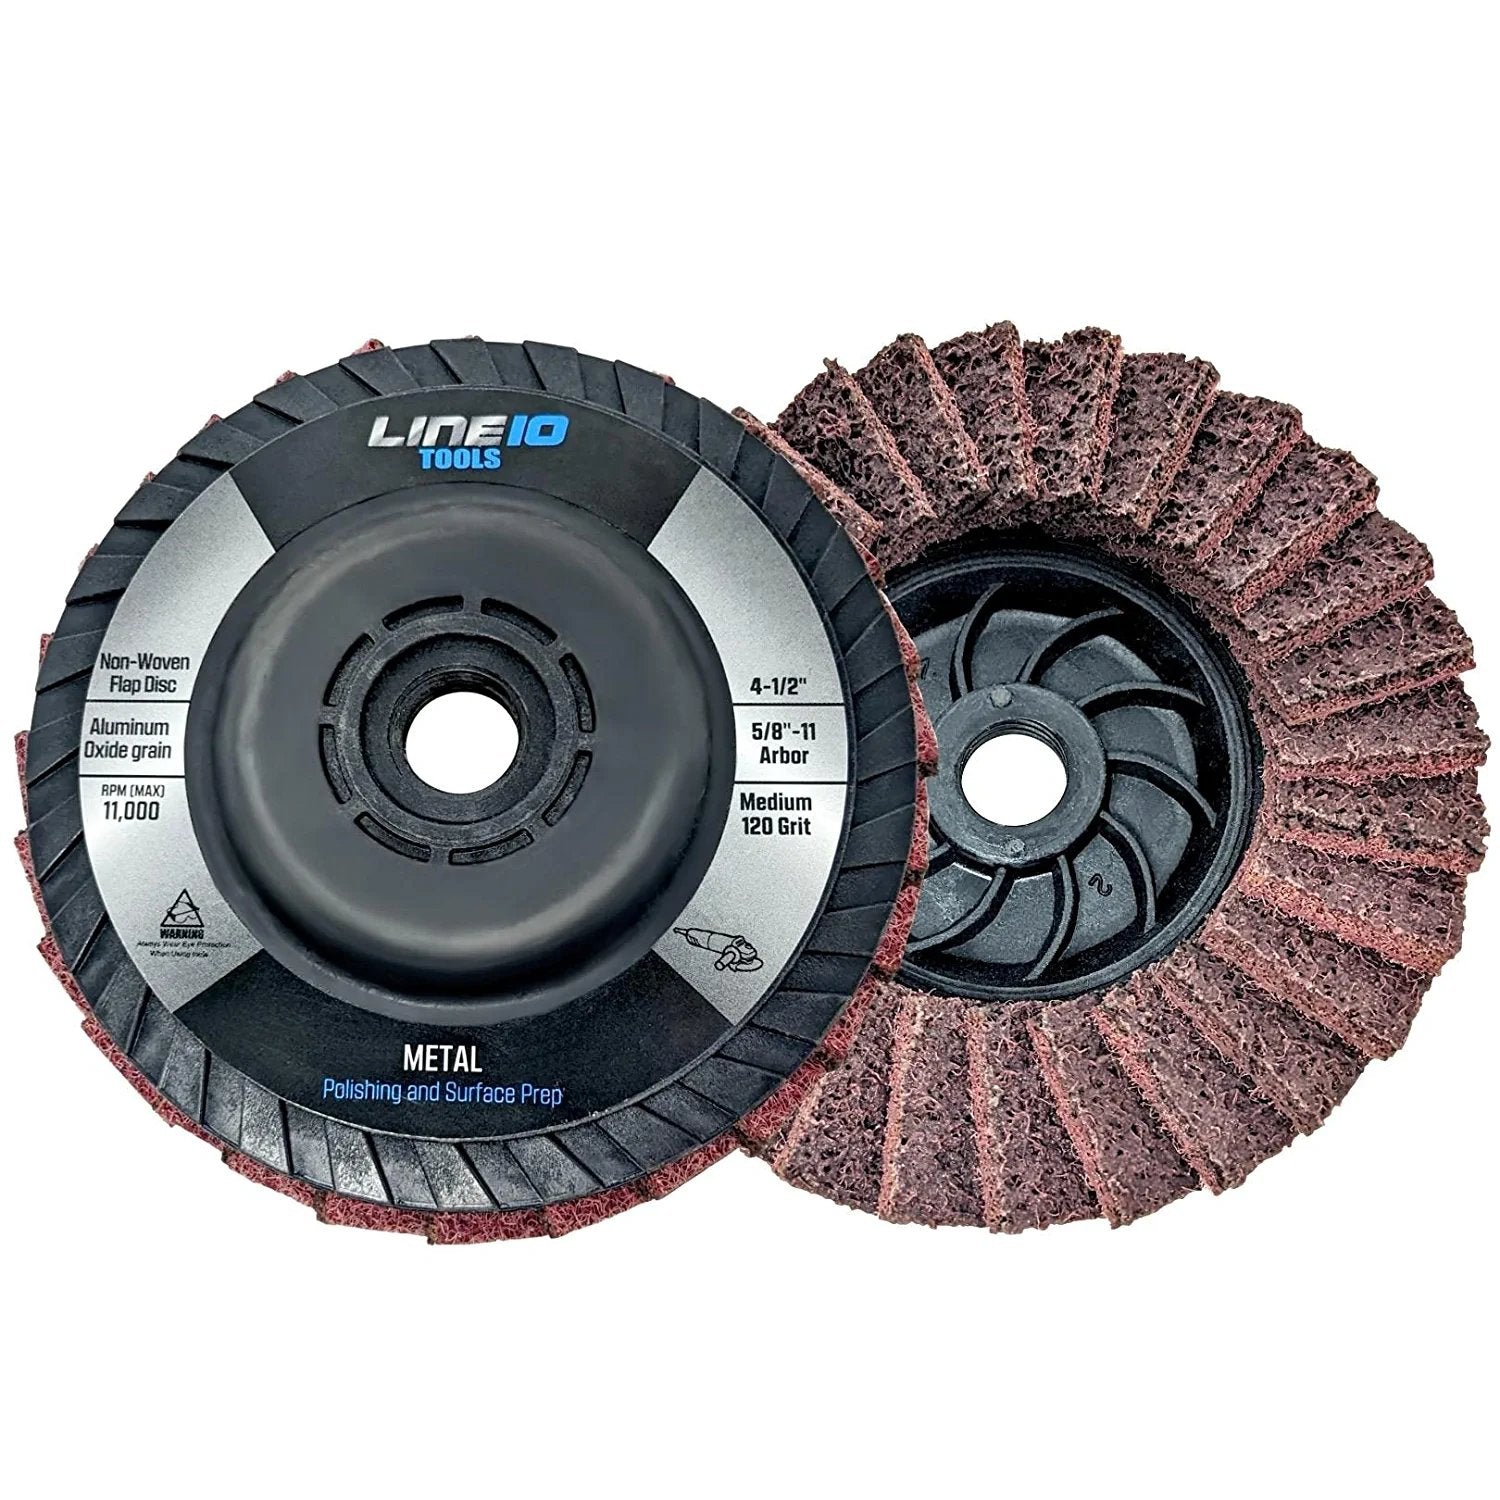 5pk Red Non-Woven Abrasive Flap Disc 4-1/2" with 5/8-11 Threaded Arbor for Angle Grinder